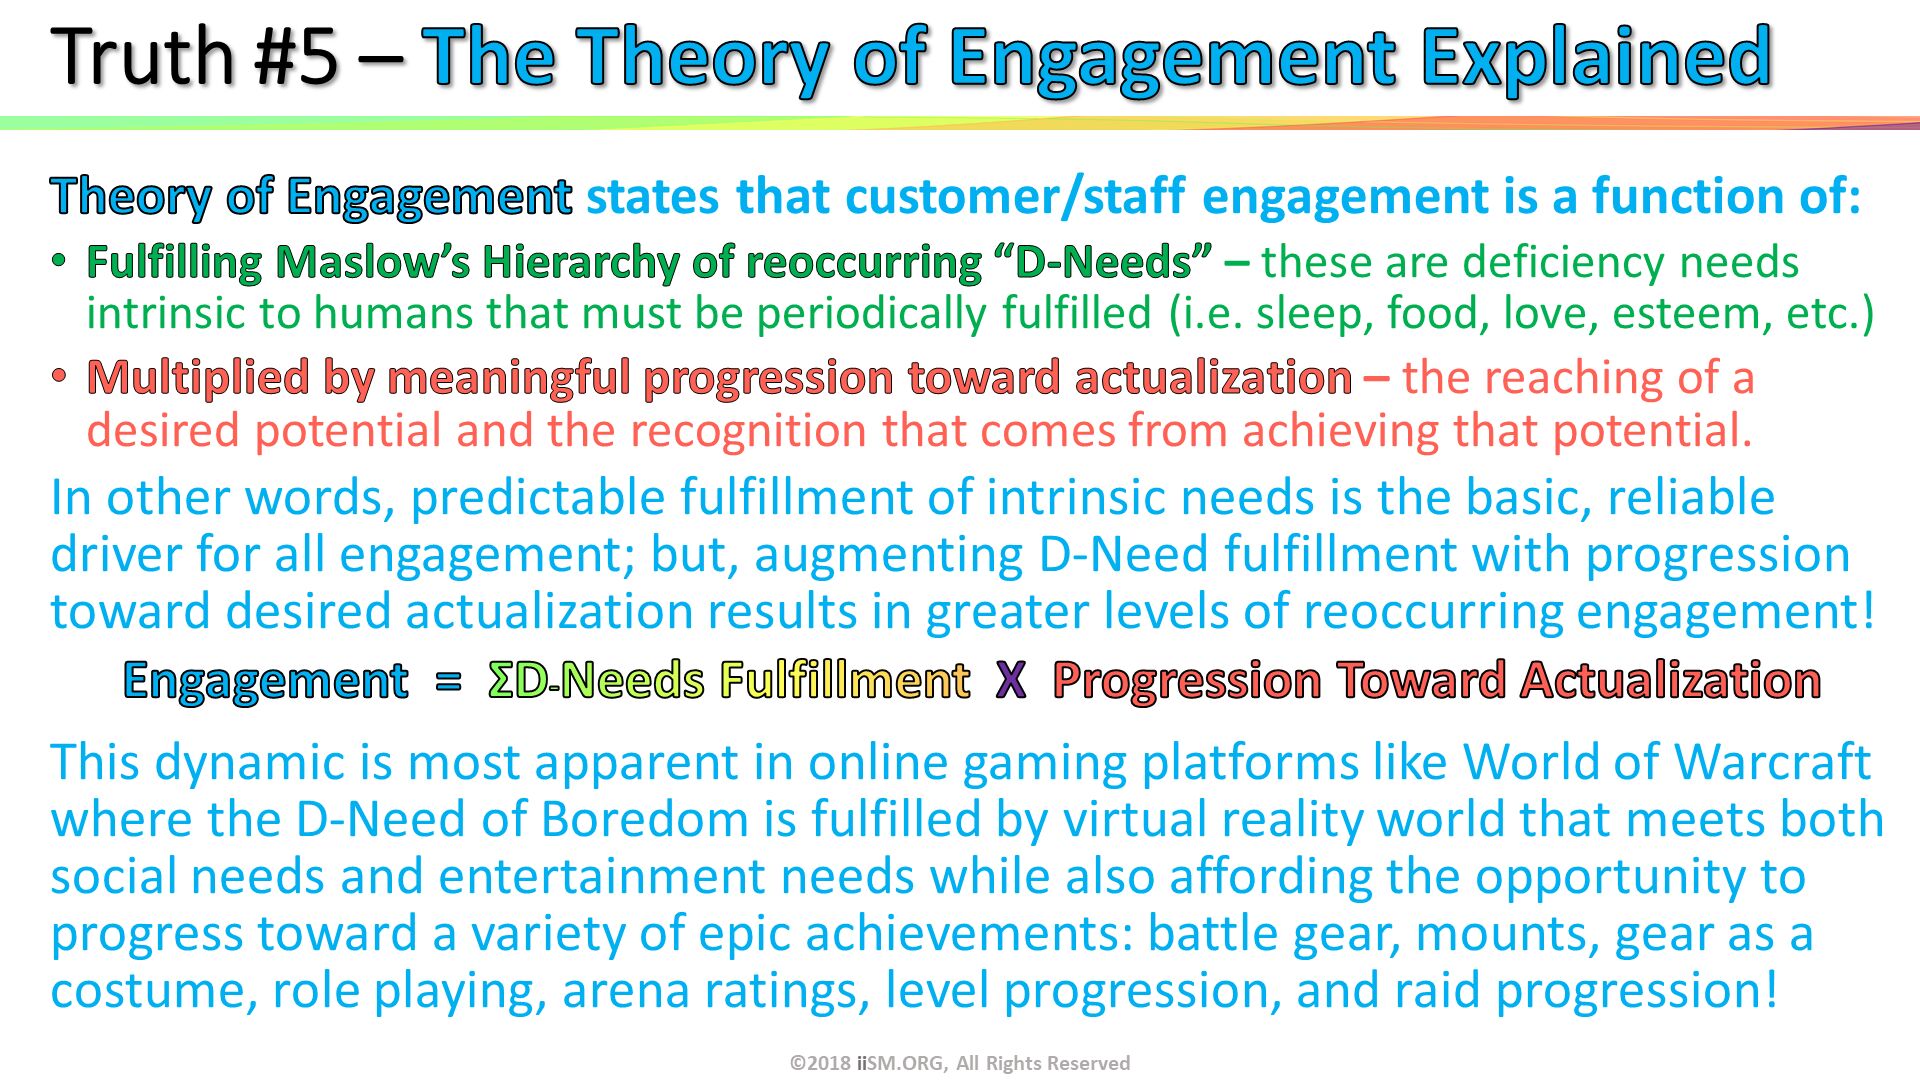 Truth #5 – The Theory of Engagement Explained. ©2018 iiSM.ORG, All Rights Reserved. 
. Theory of Engagement states that customer/staff engagement is a function of: 
Fulfilling Maslow’s Hierarchy of reoccurring “D-Needs” – these are deficiency needs intrinsic to humans that must be periodically fulfilled (i.e. sleep, food, love, esteem, etc.)
Multiplied by meaningful progression toward actualization – the reaching of a desired potential and the recognition that comes from achieving that potential.
In other words, predictable fulfillment of intrinsic needs is the basic, reliable driver for all engagement; but, augmenting D-Need fulfillment with progression toward desired actualization results in greater levels of reoccurring engagement!
Engagement  =  ΣD-Needs Fulfillment  X  Progression Toward Actualization
This dynamic is most apparent in online gaming platforms like World of Warcraft where the D-Need of Boredom is fulfilled by virtual reality world that meets both social needs and entertainment needs while also affording the opportunity to progress toward a variety of epic achievements: battle gear, mounts, gear as a costume, role playing, arena ratings, level progression, and raid progression! . 